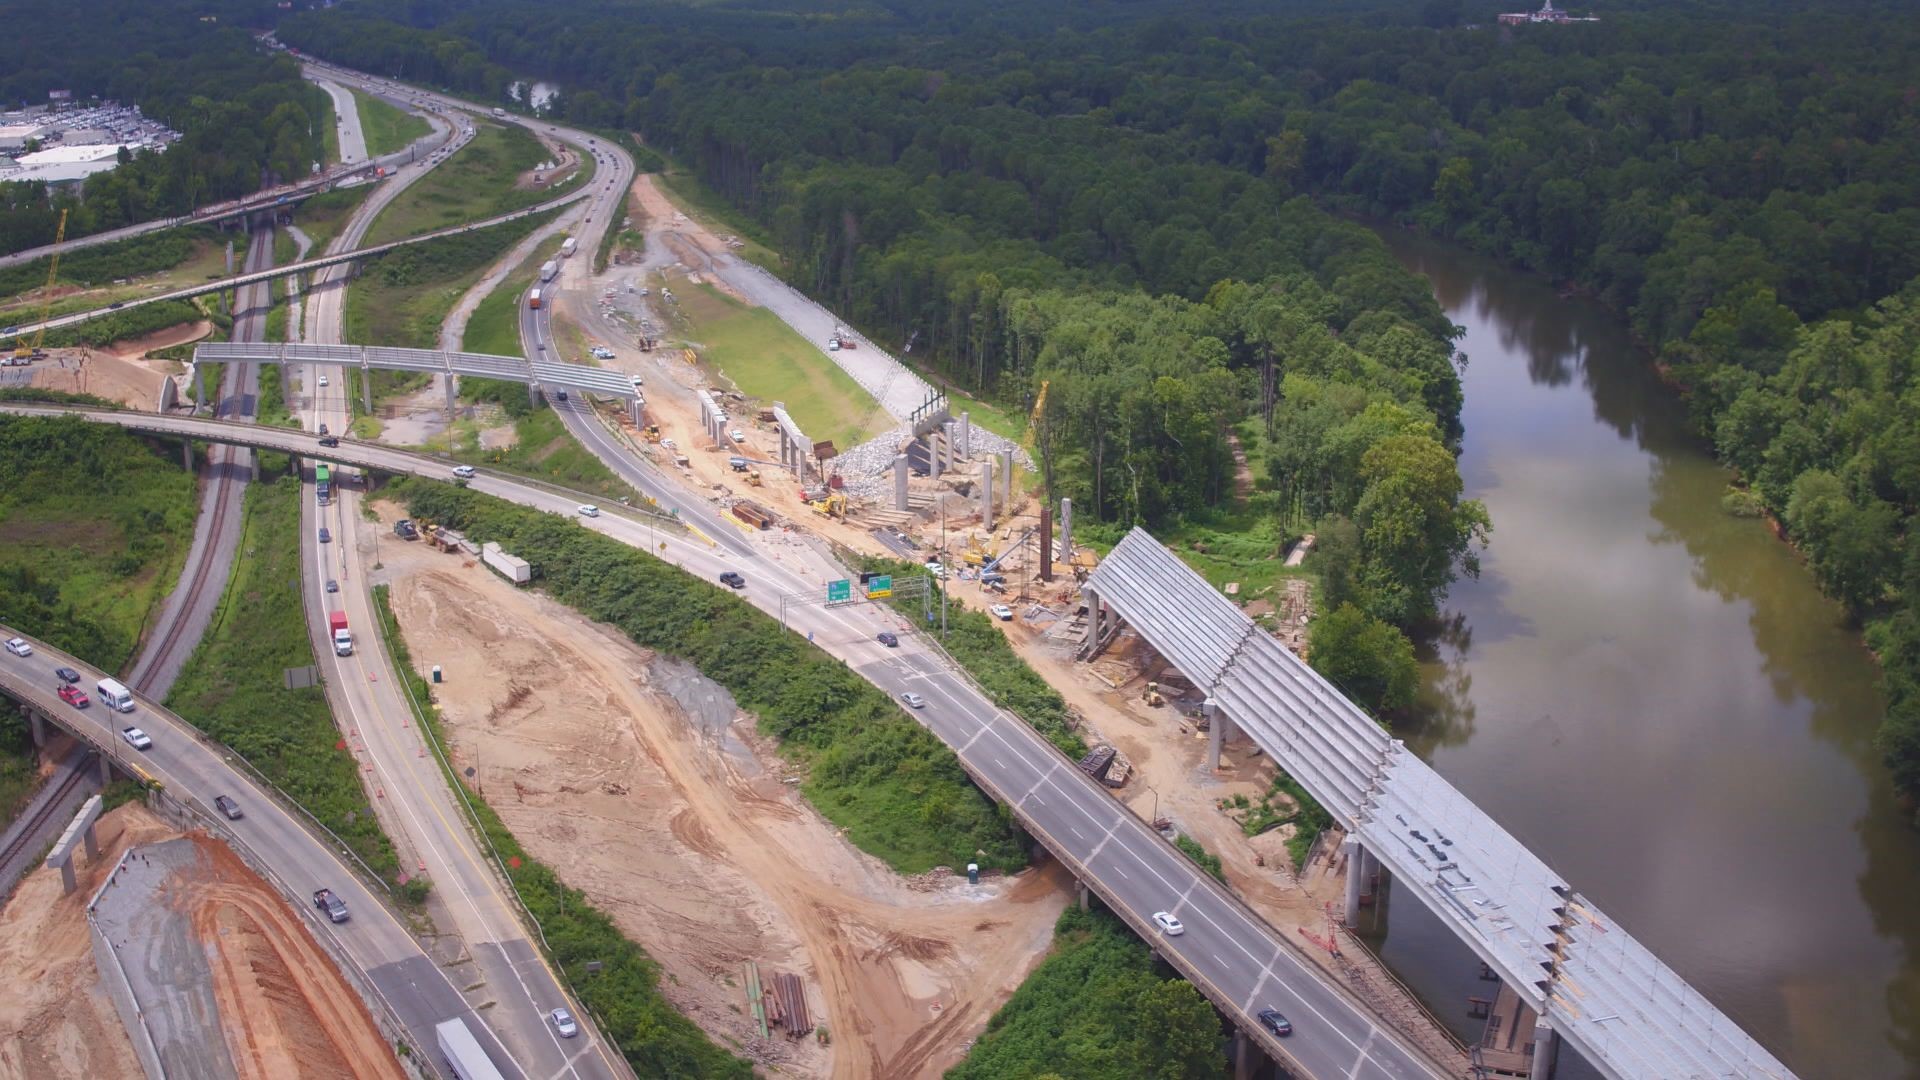 The state started this project to reduce congestion and improve safety, but has construction brought more accidents?